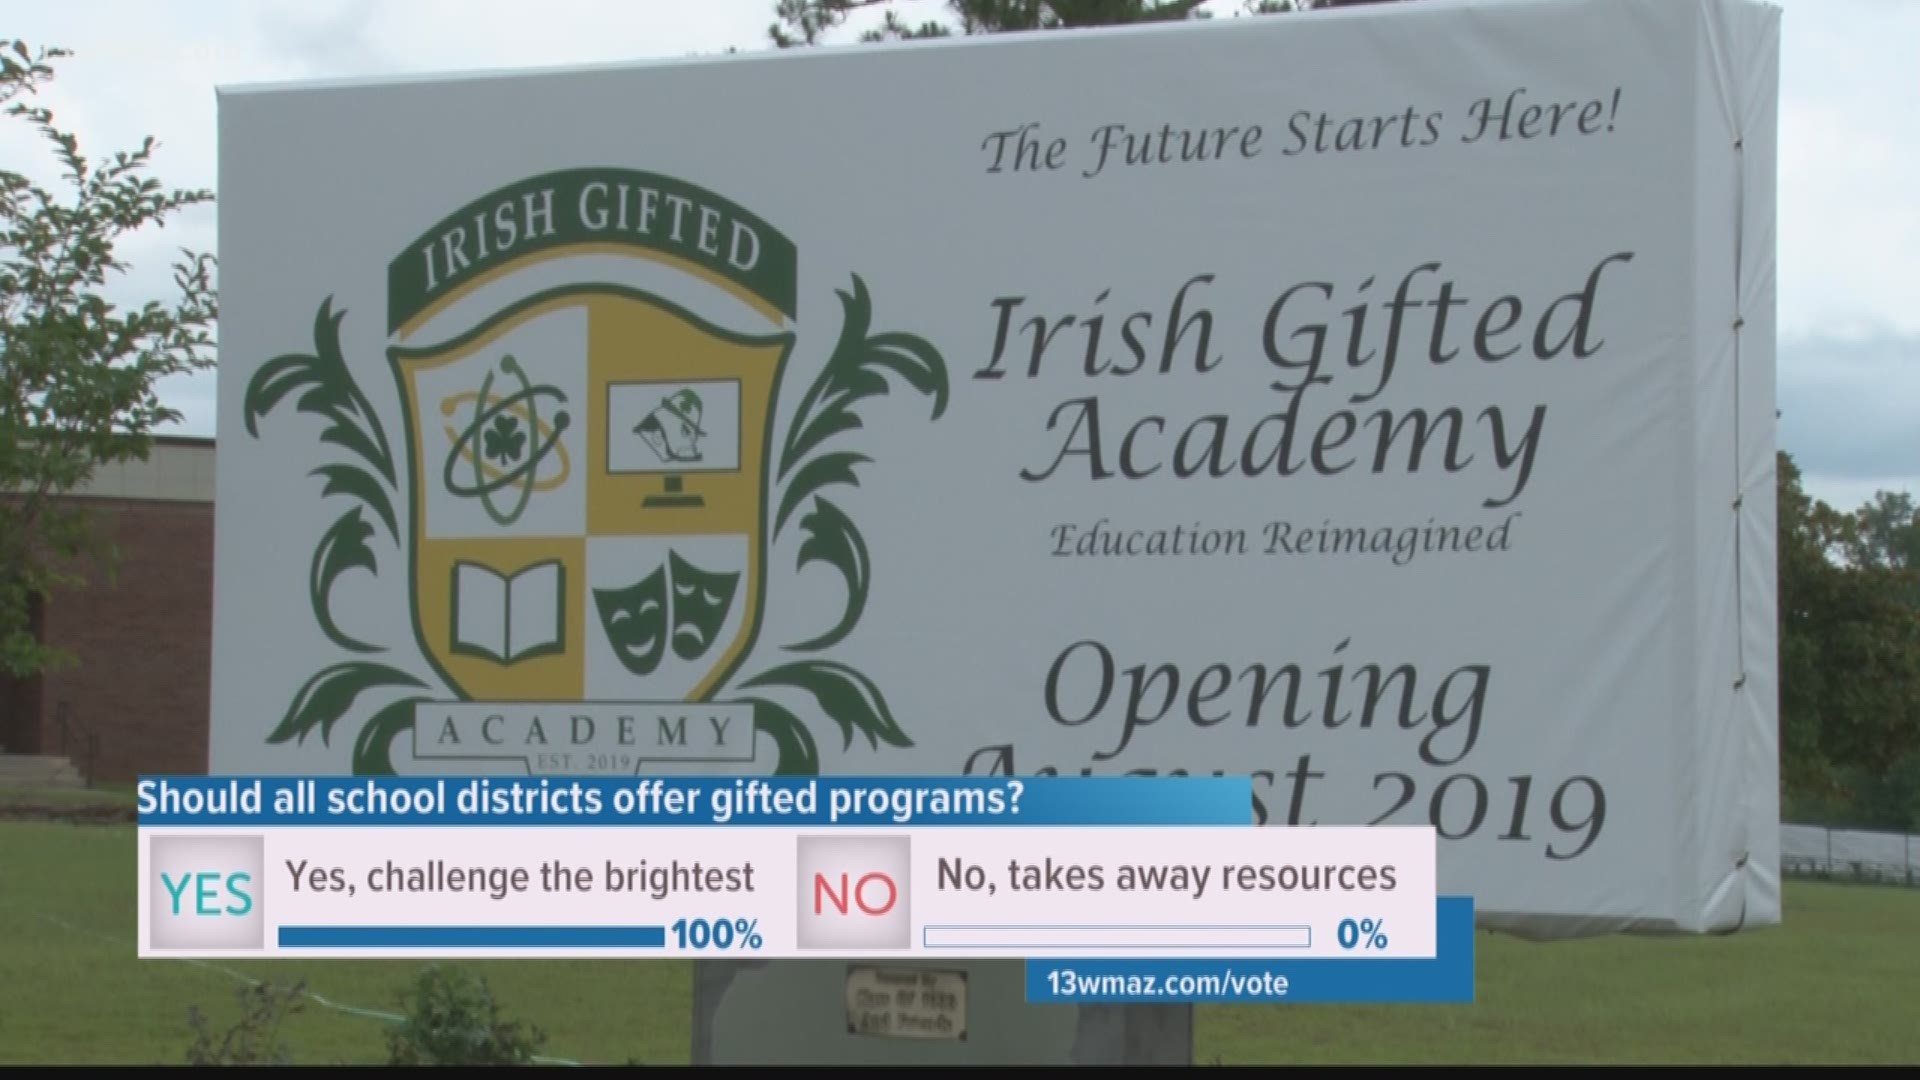 Dublin City Schools will open their new Irish Gifted Academy this August in hopes of better serving their gifted students. Pepper Baker spoke with school administrators and parents to learn more about their expectations for the program in the upcoming school year.